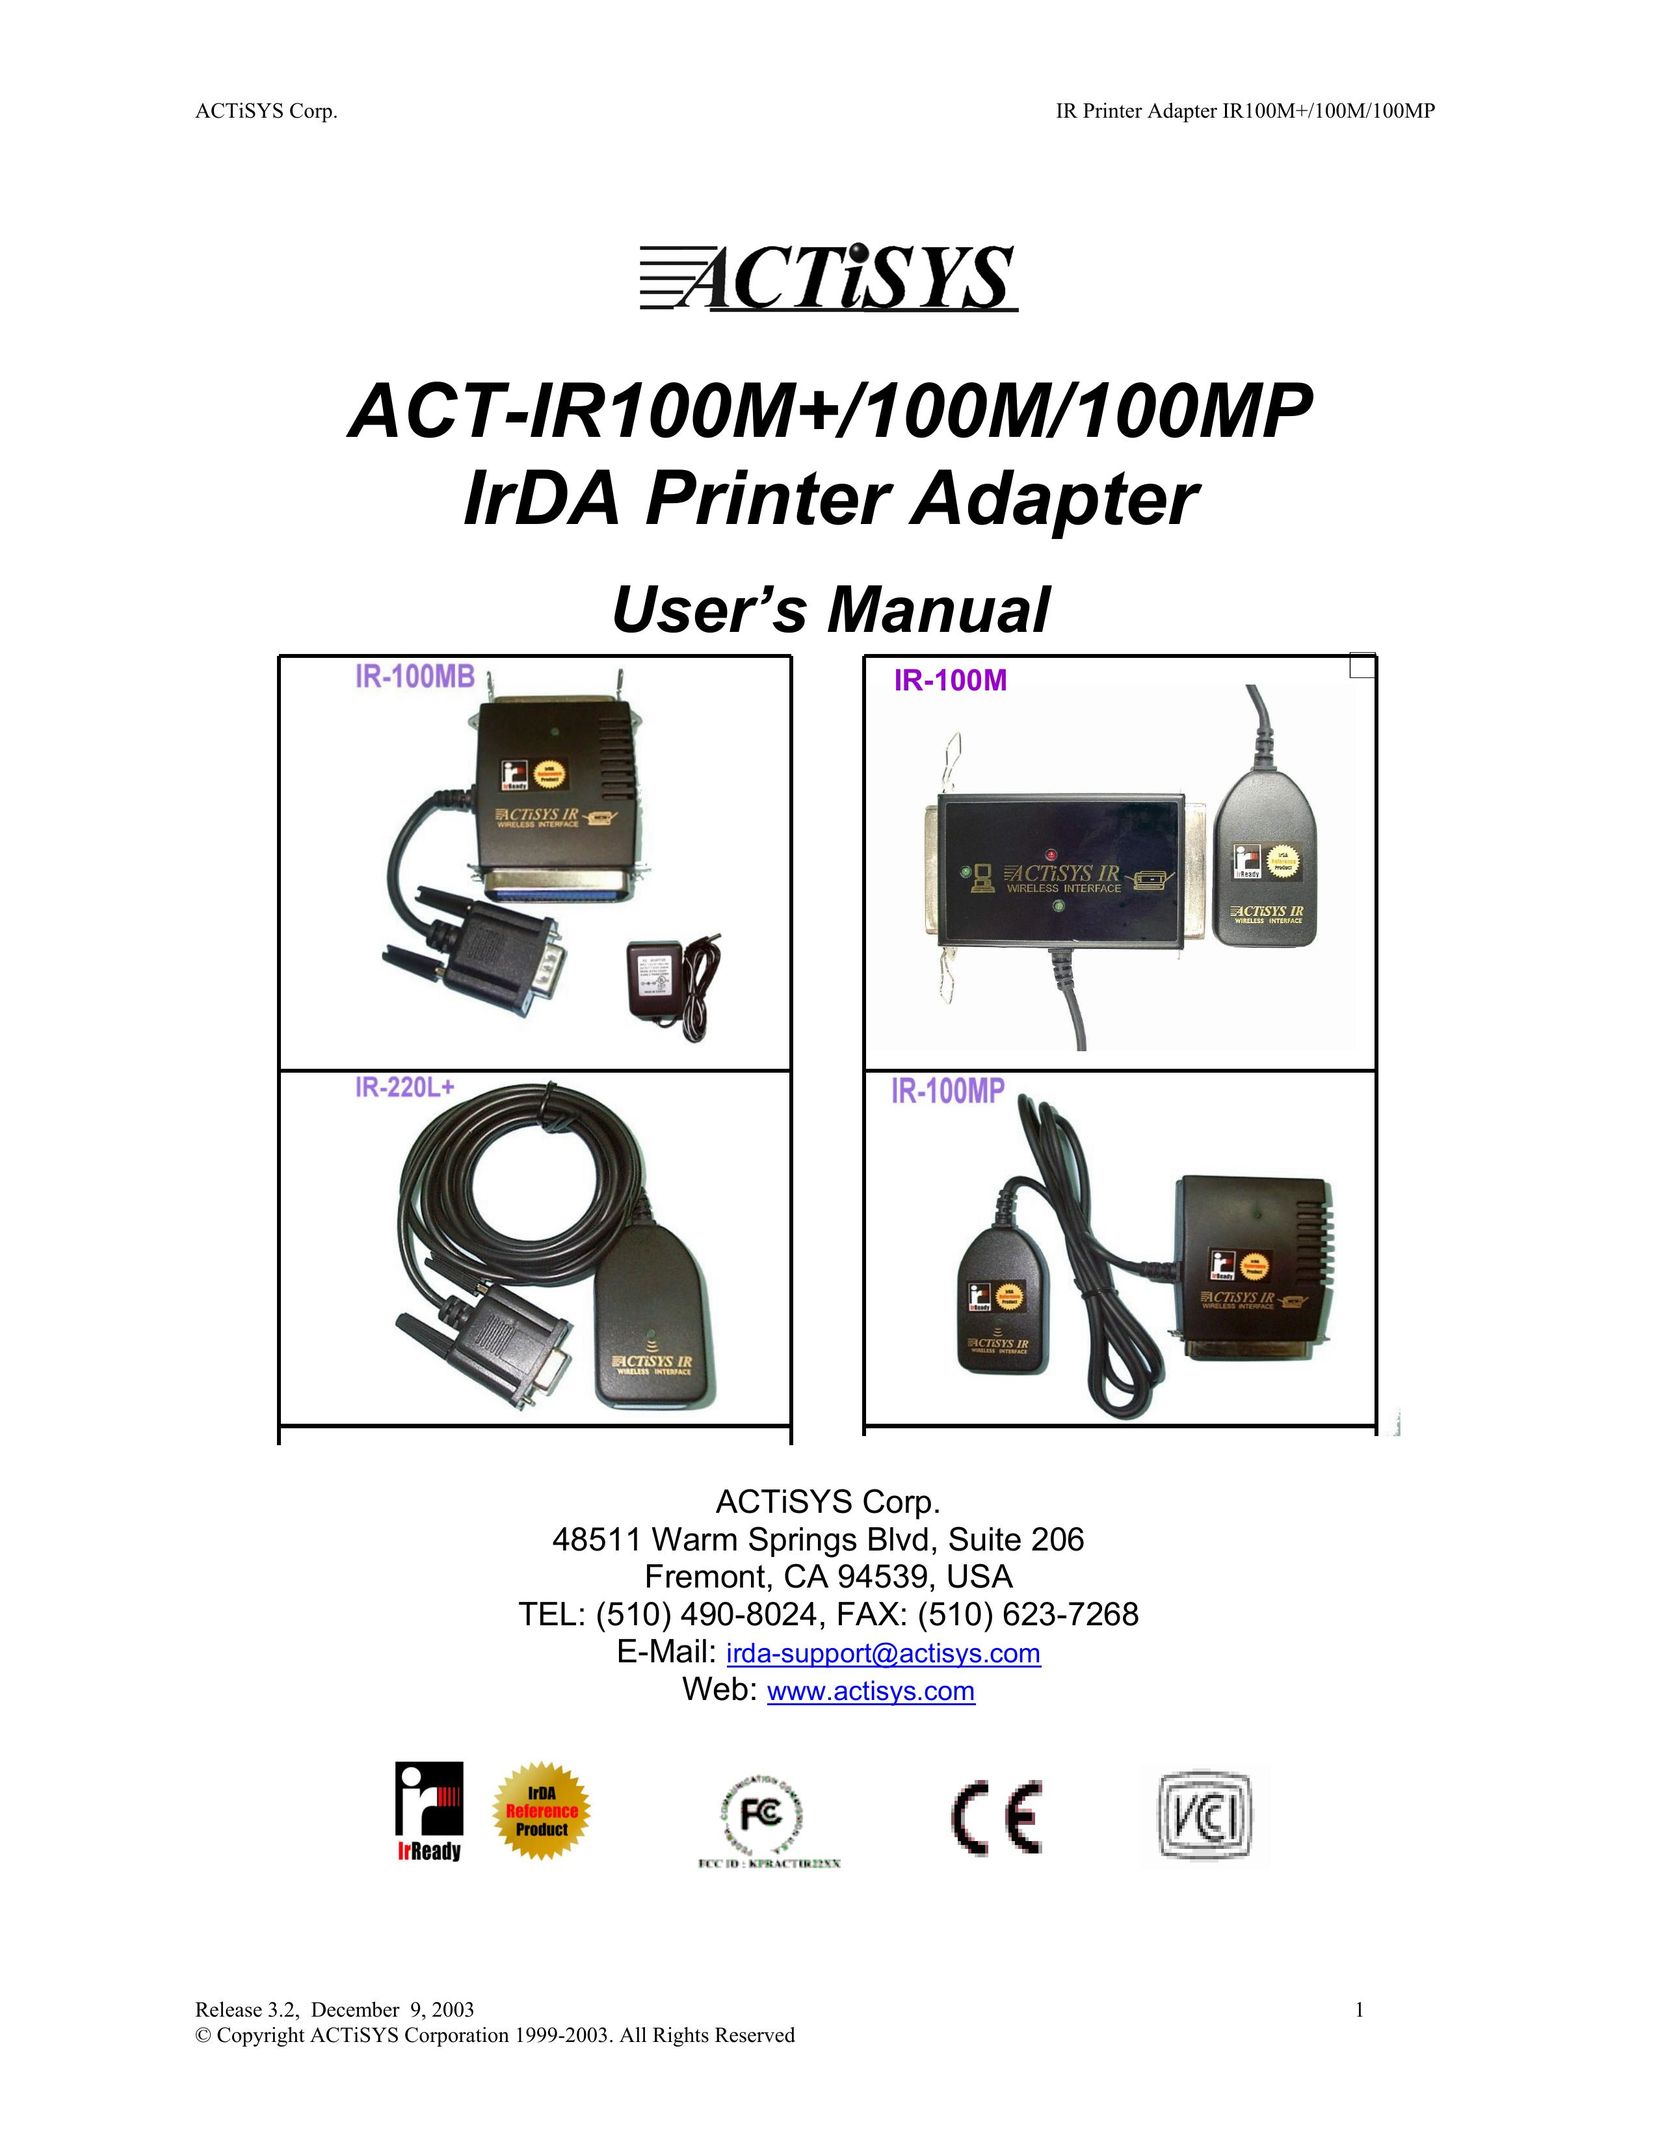 ACTiSYS ACT-100MP Network Card User Manual